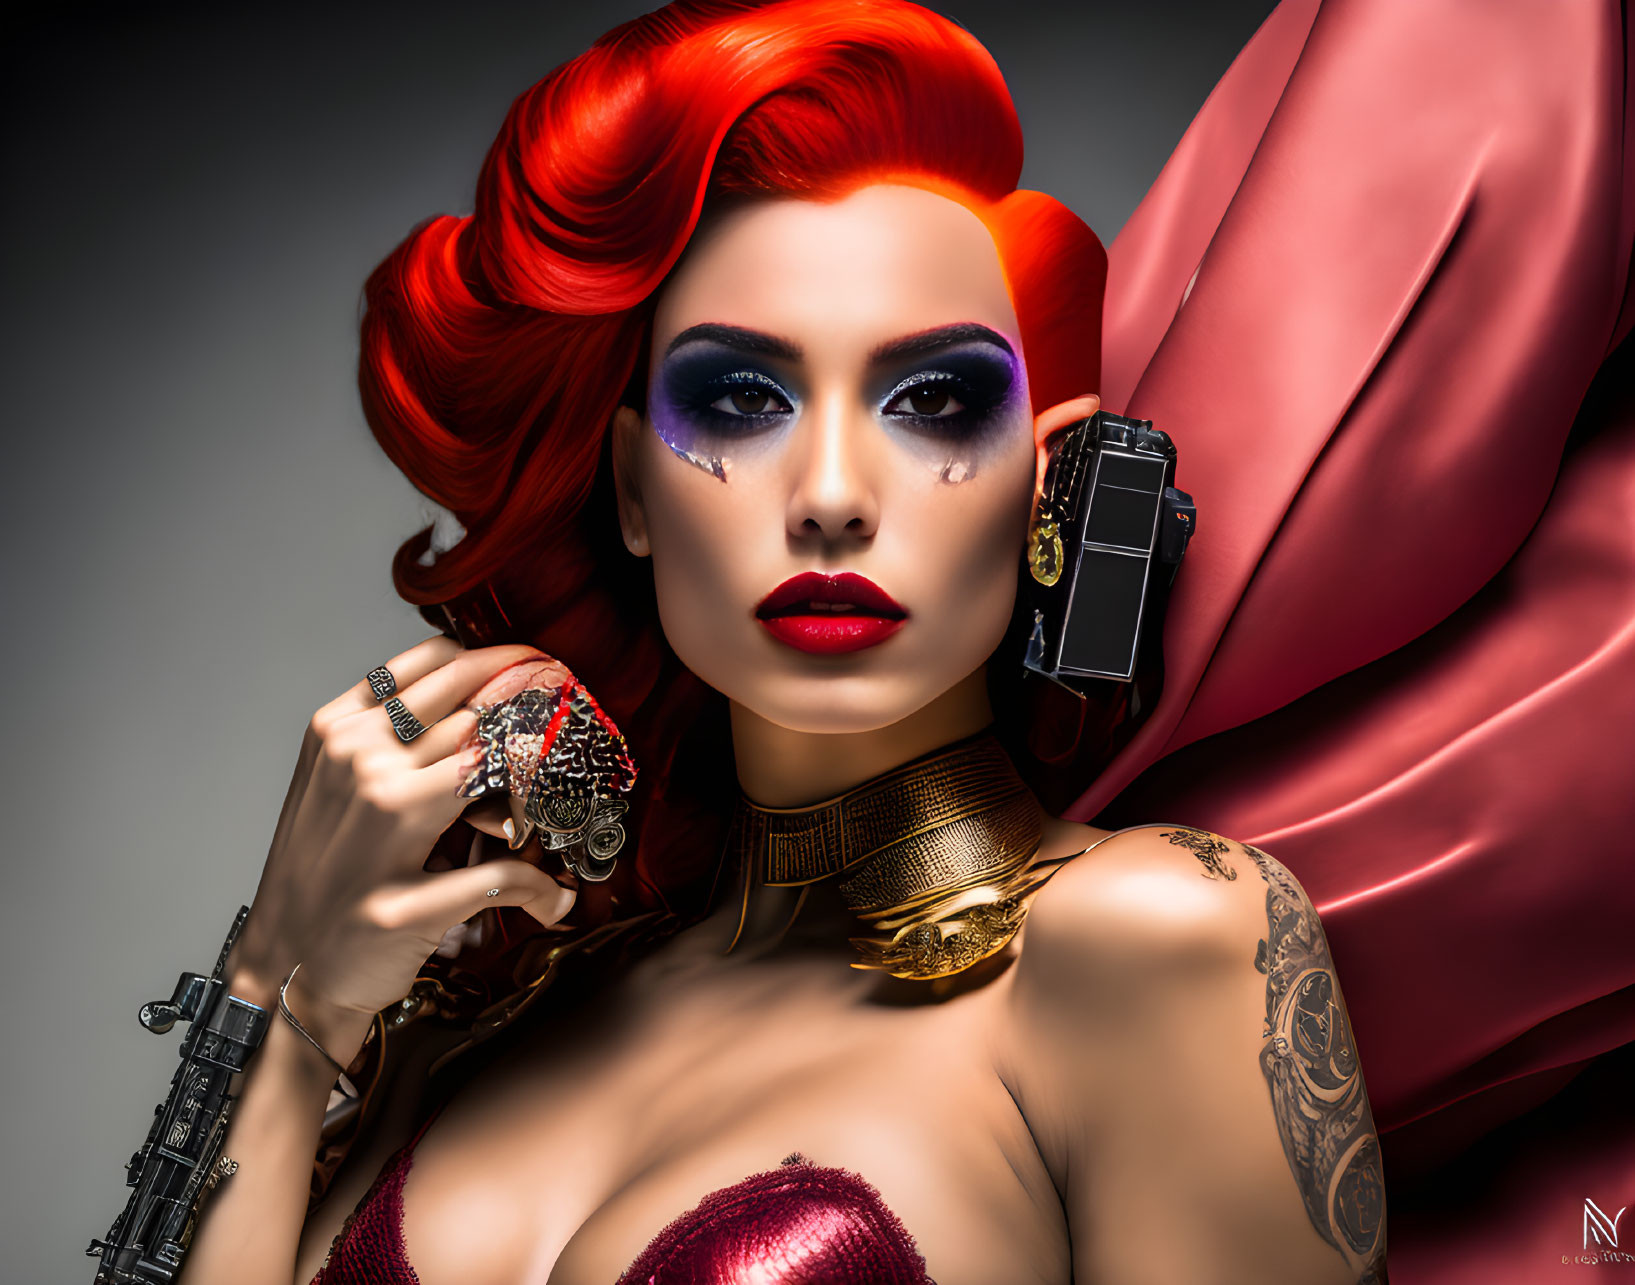 Vibrant Red-Haired Woman in Red Dress with Tattoo and Gold Jewelry